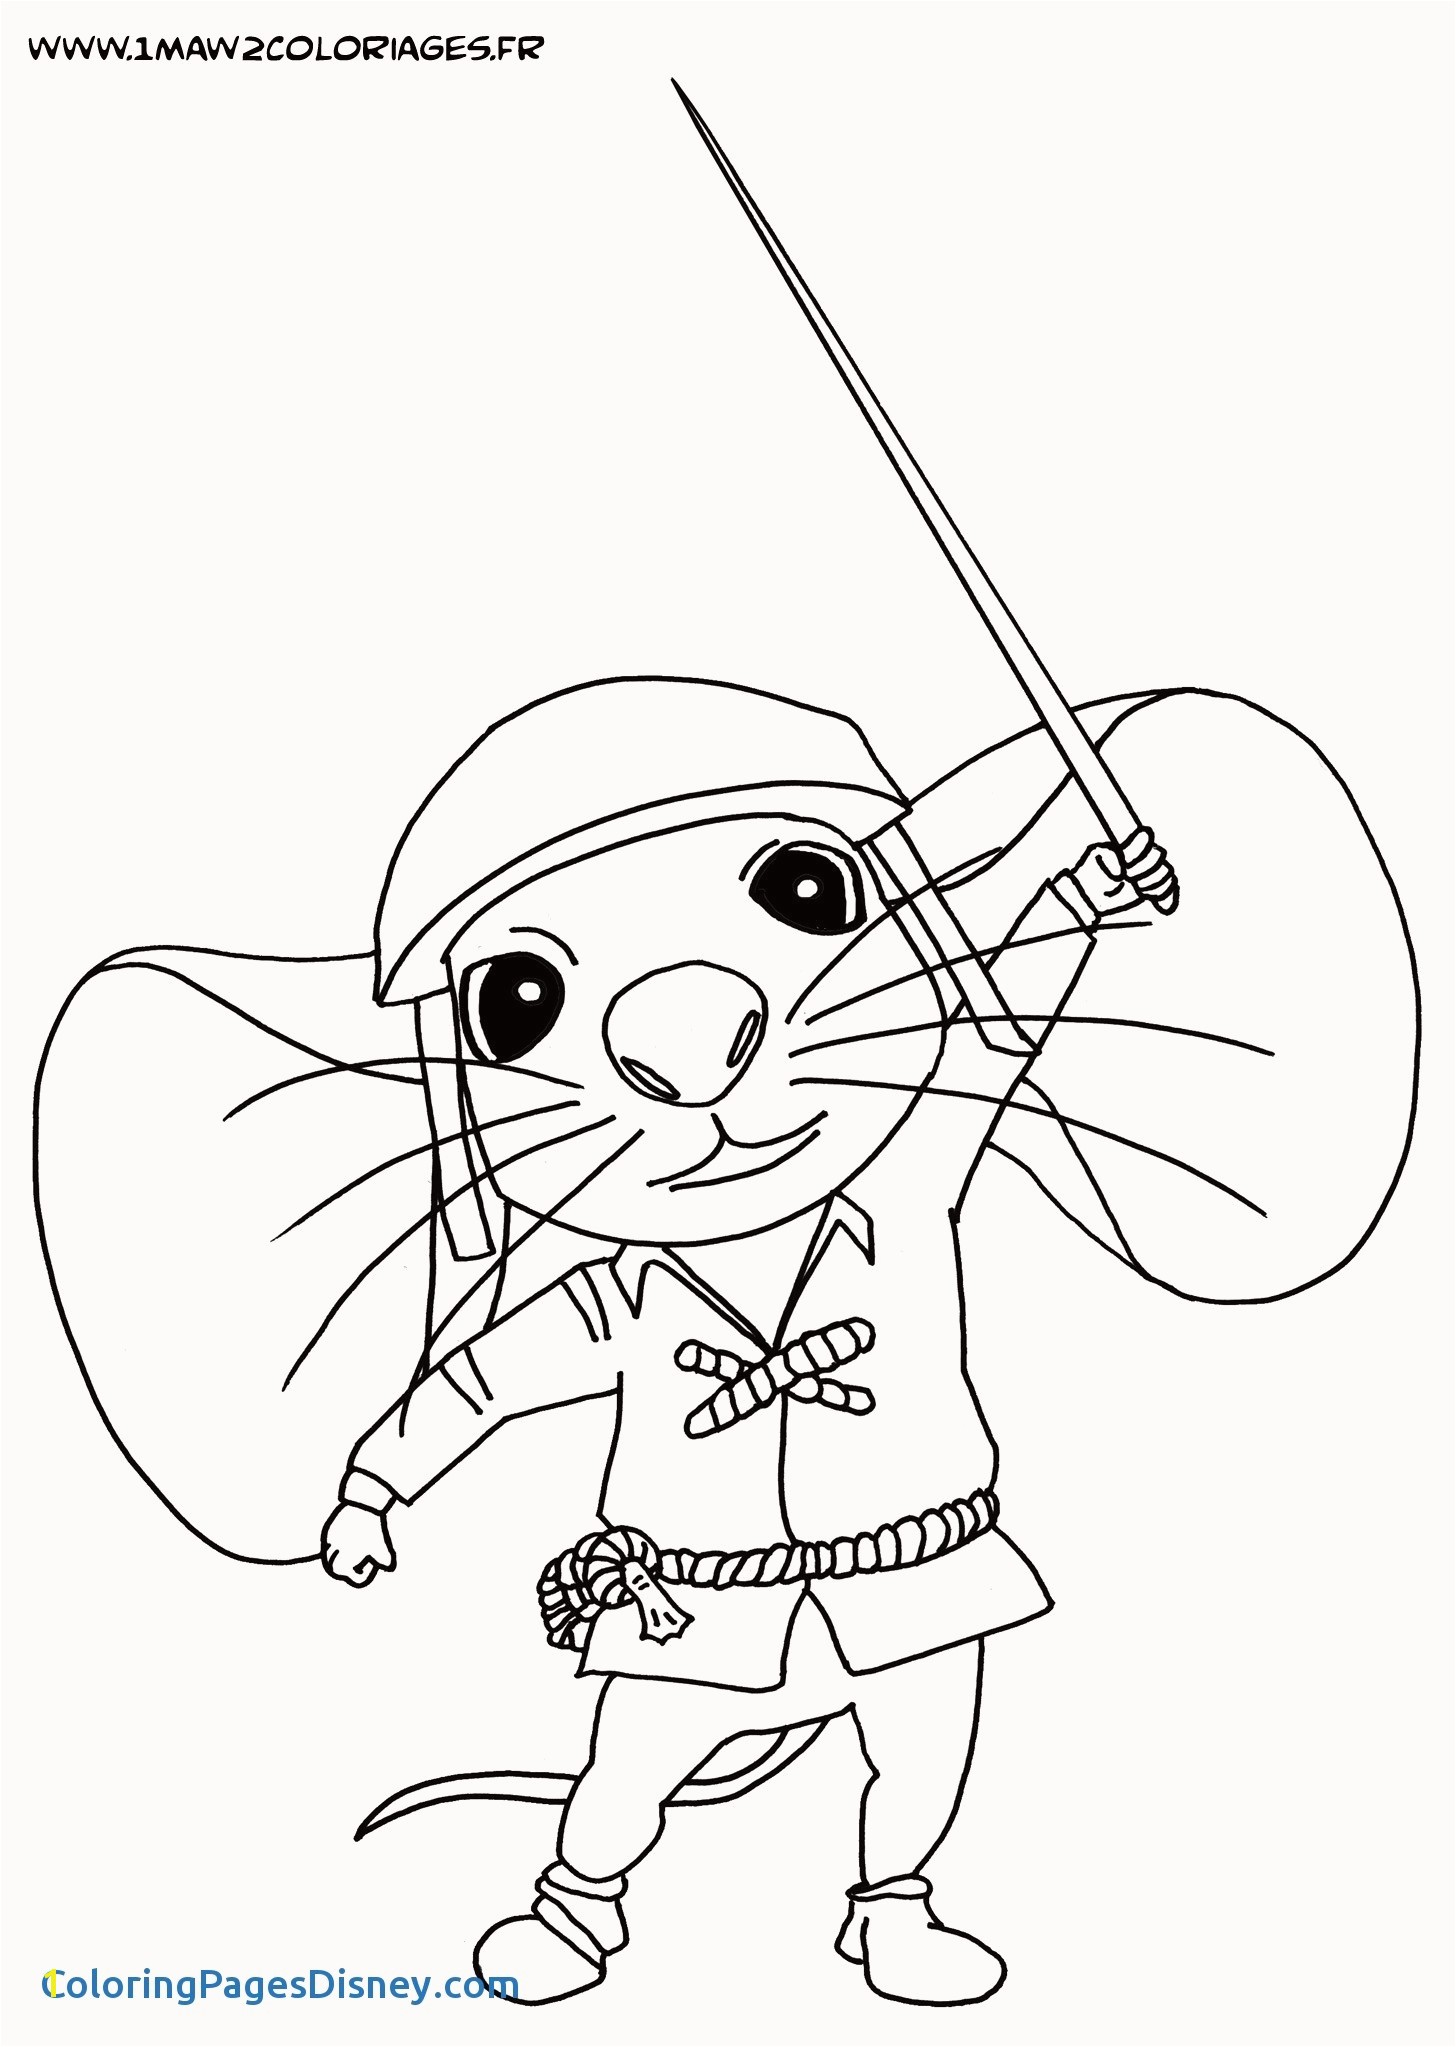 Pbr Coloring Pages Unique Goblin Coloring Pages Awesome Best Coloring Skylander Giants 30 Elegant Pbr